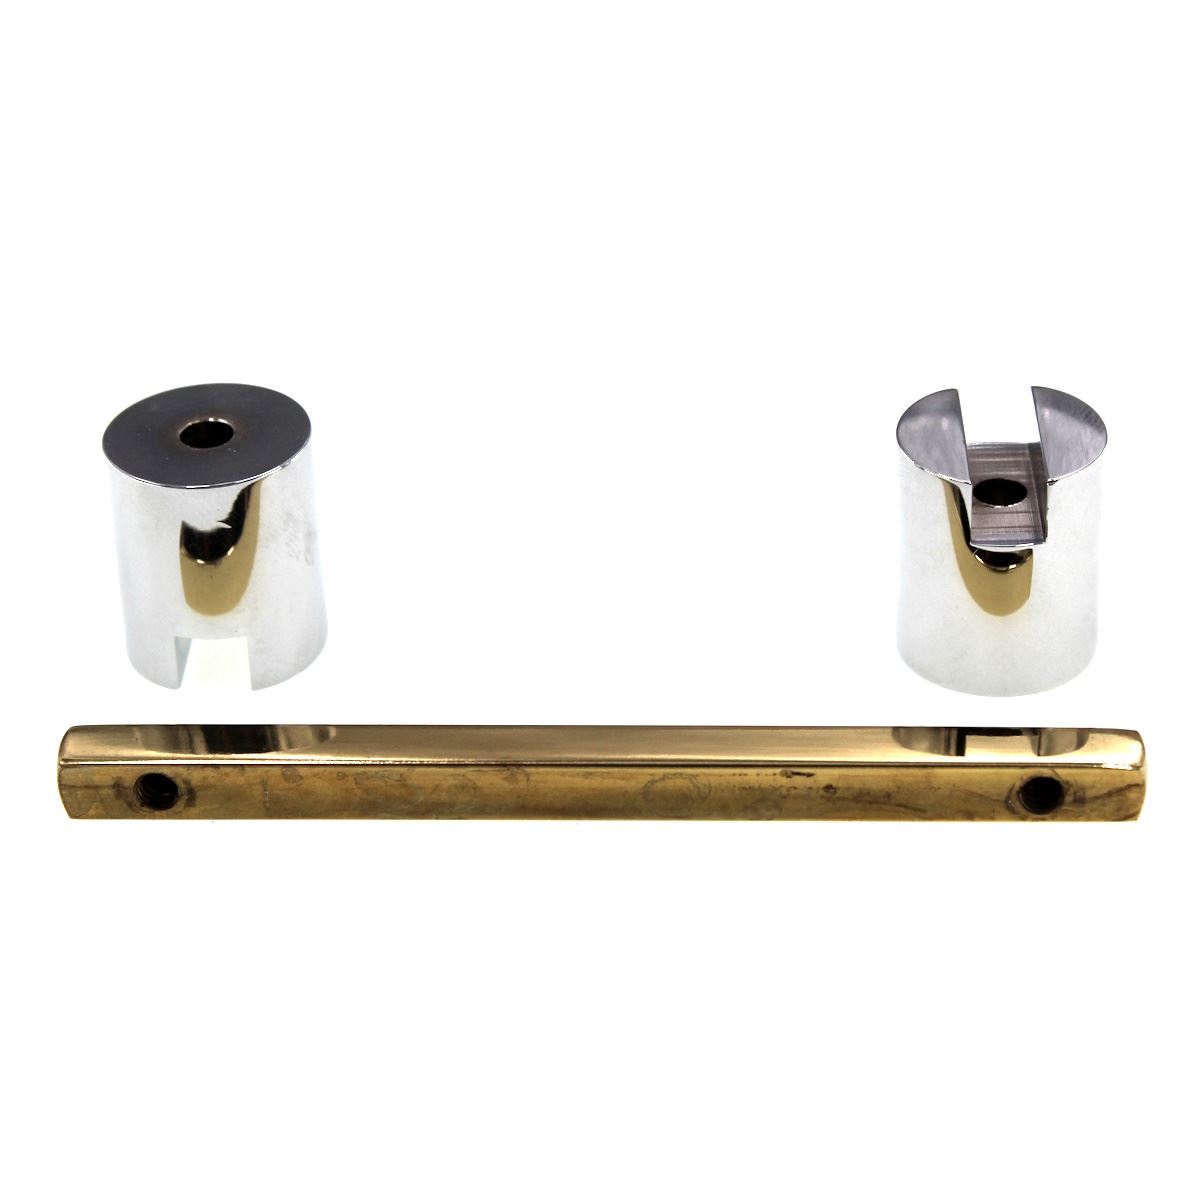 Period Brass Cabinet Pull 3" Ctr Two-Tone Polished Brass Solid Brass C135